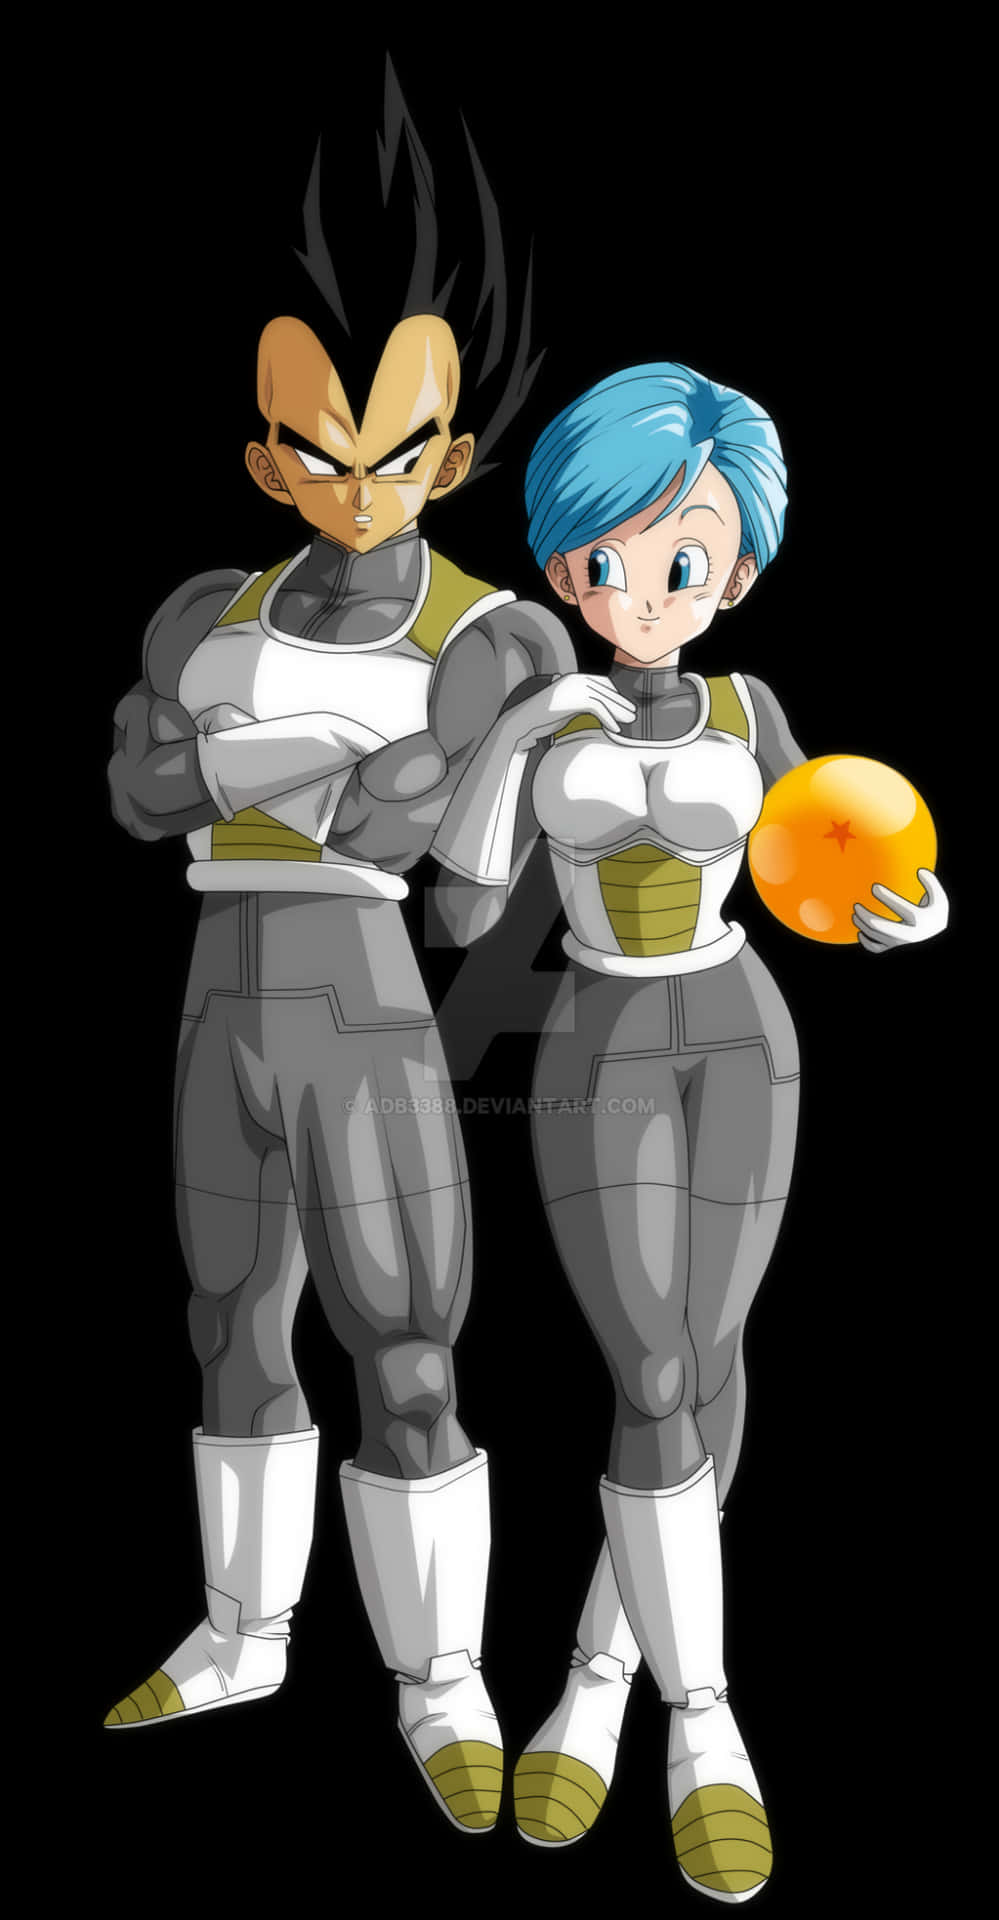 Vegeta and Bulma together to defeat the powerful foes Wallpaper